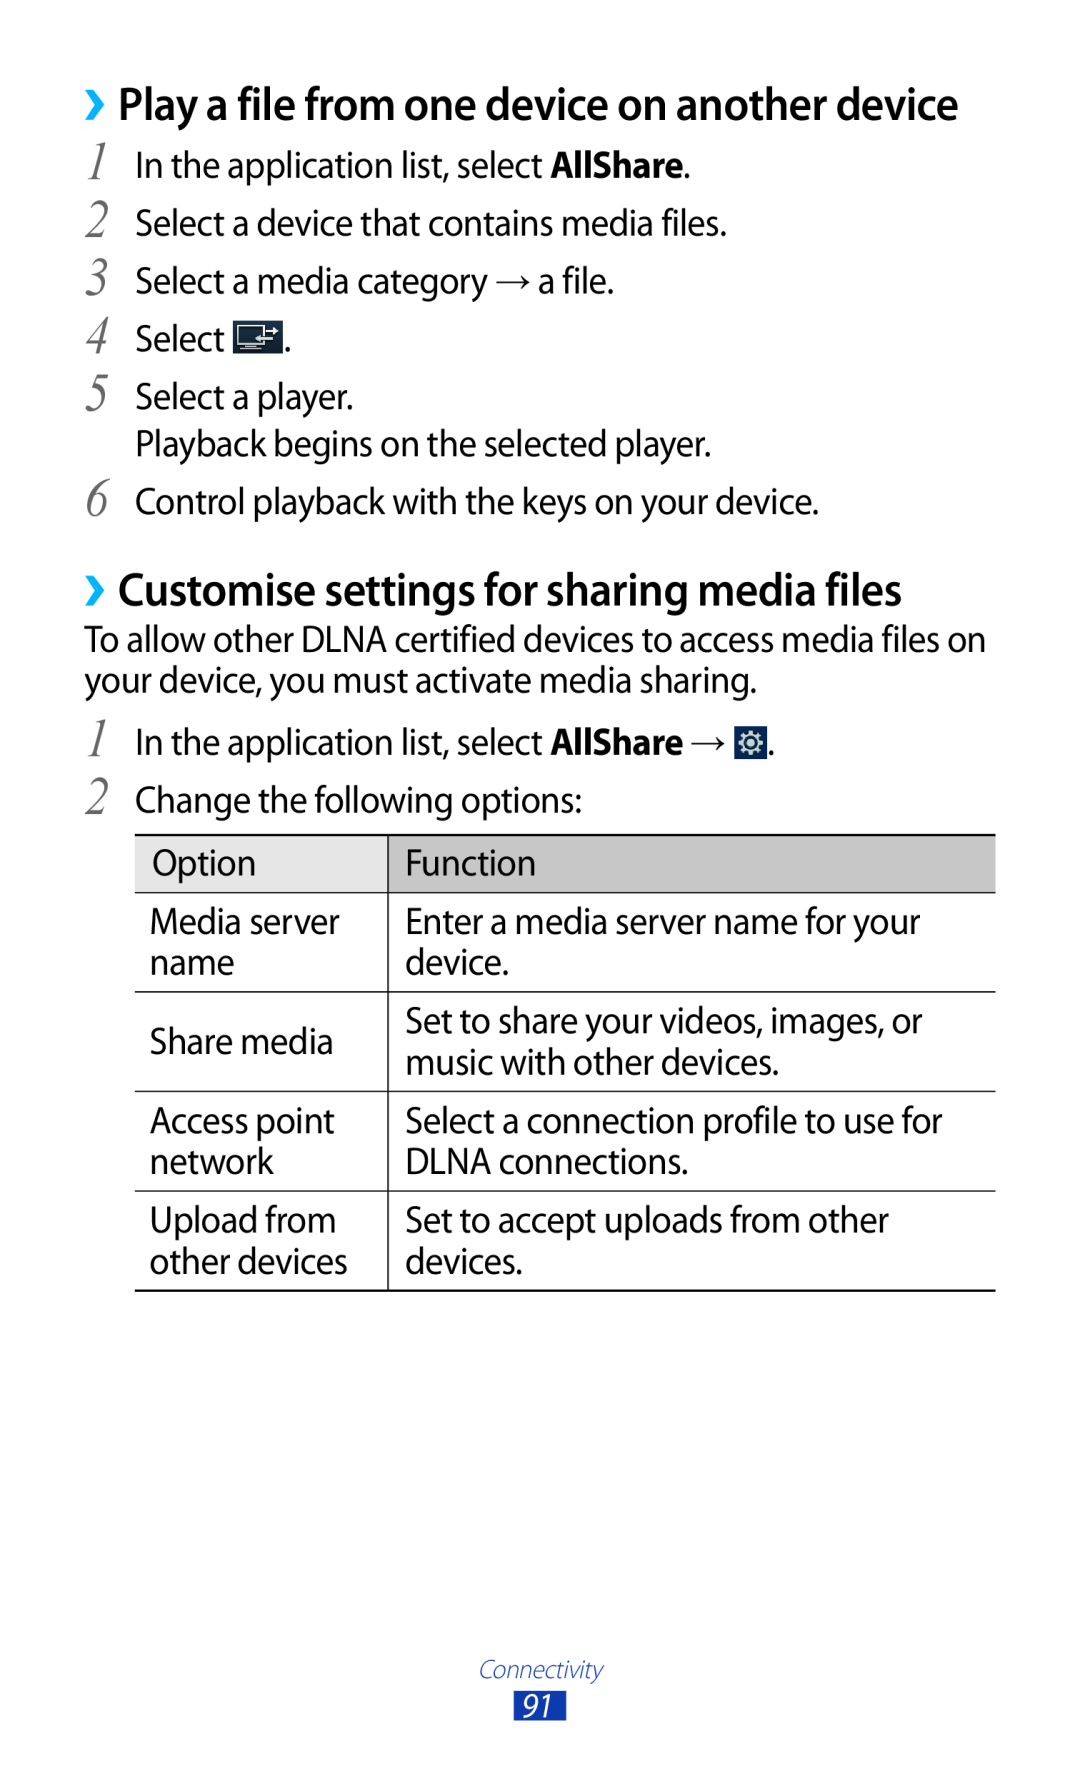 Samsung GT-P7500UWAAFR manual ››Customise settings for sharing media files, ››Play a file from one device on another device 